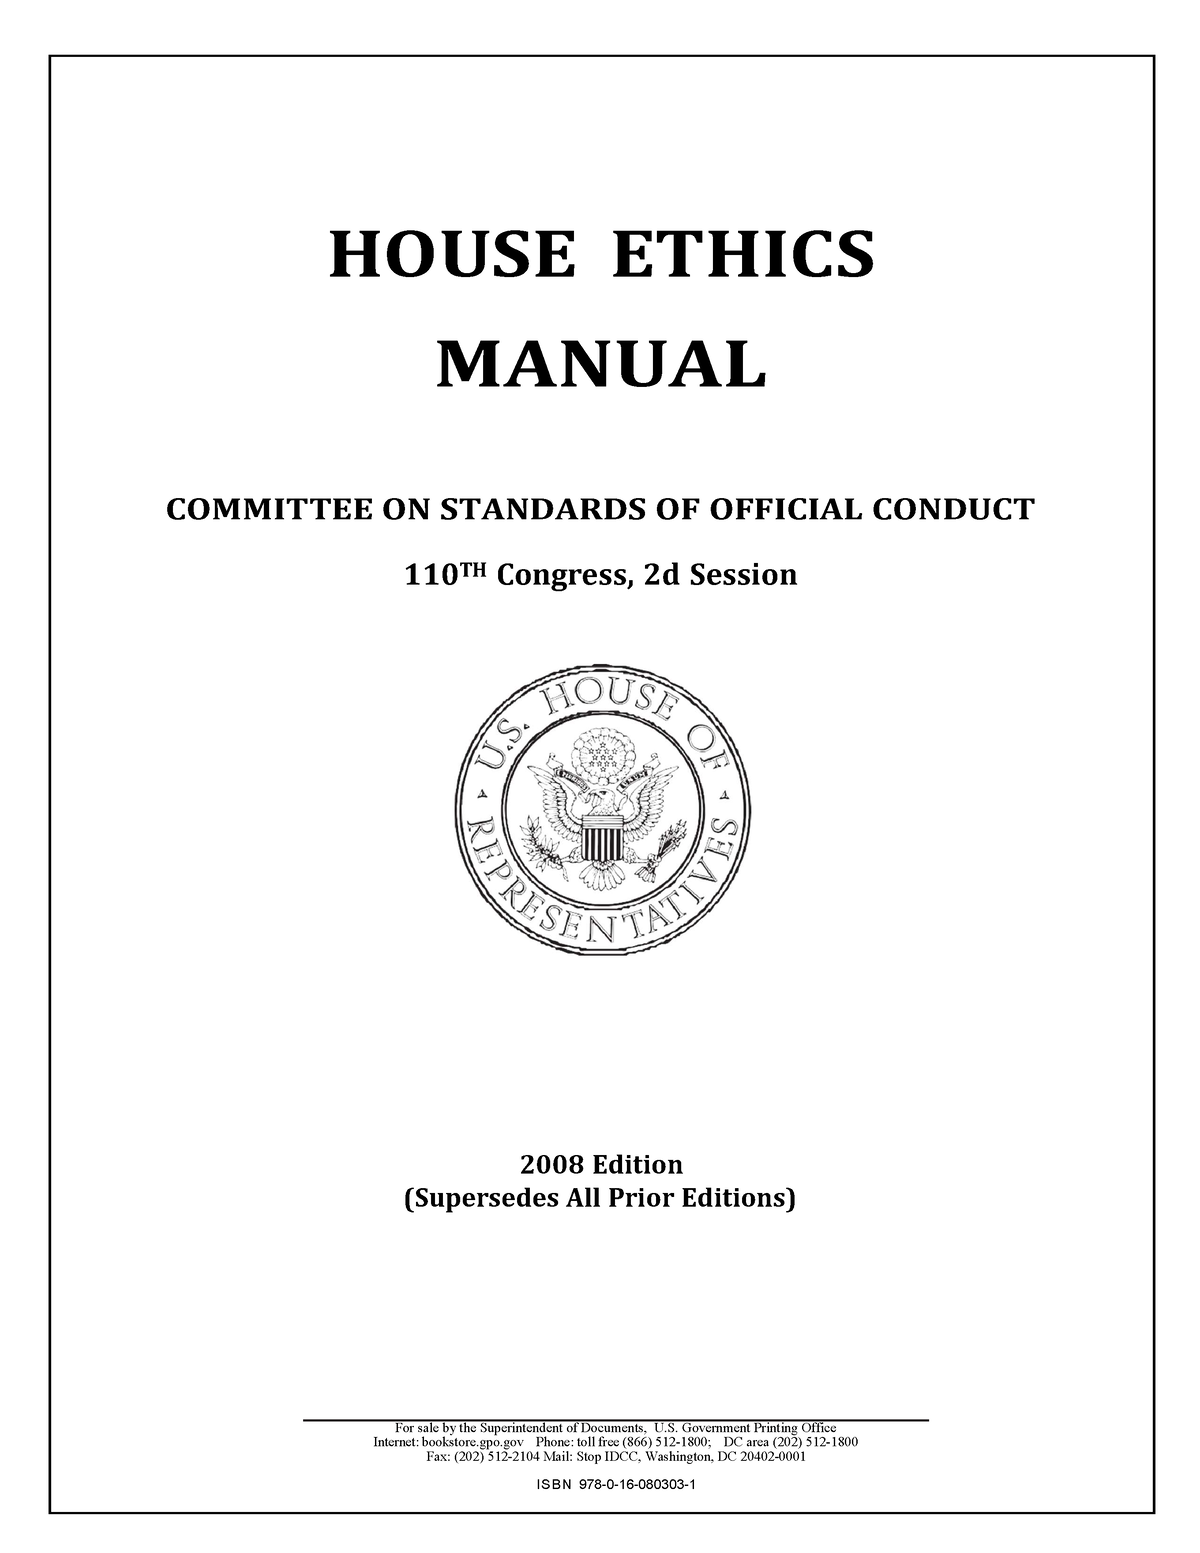 General Ethical Standards House Ethics Manual Committee On Standards Of Official Conduct 110 1236